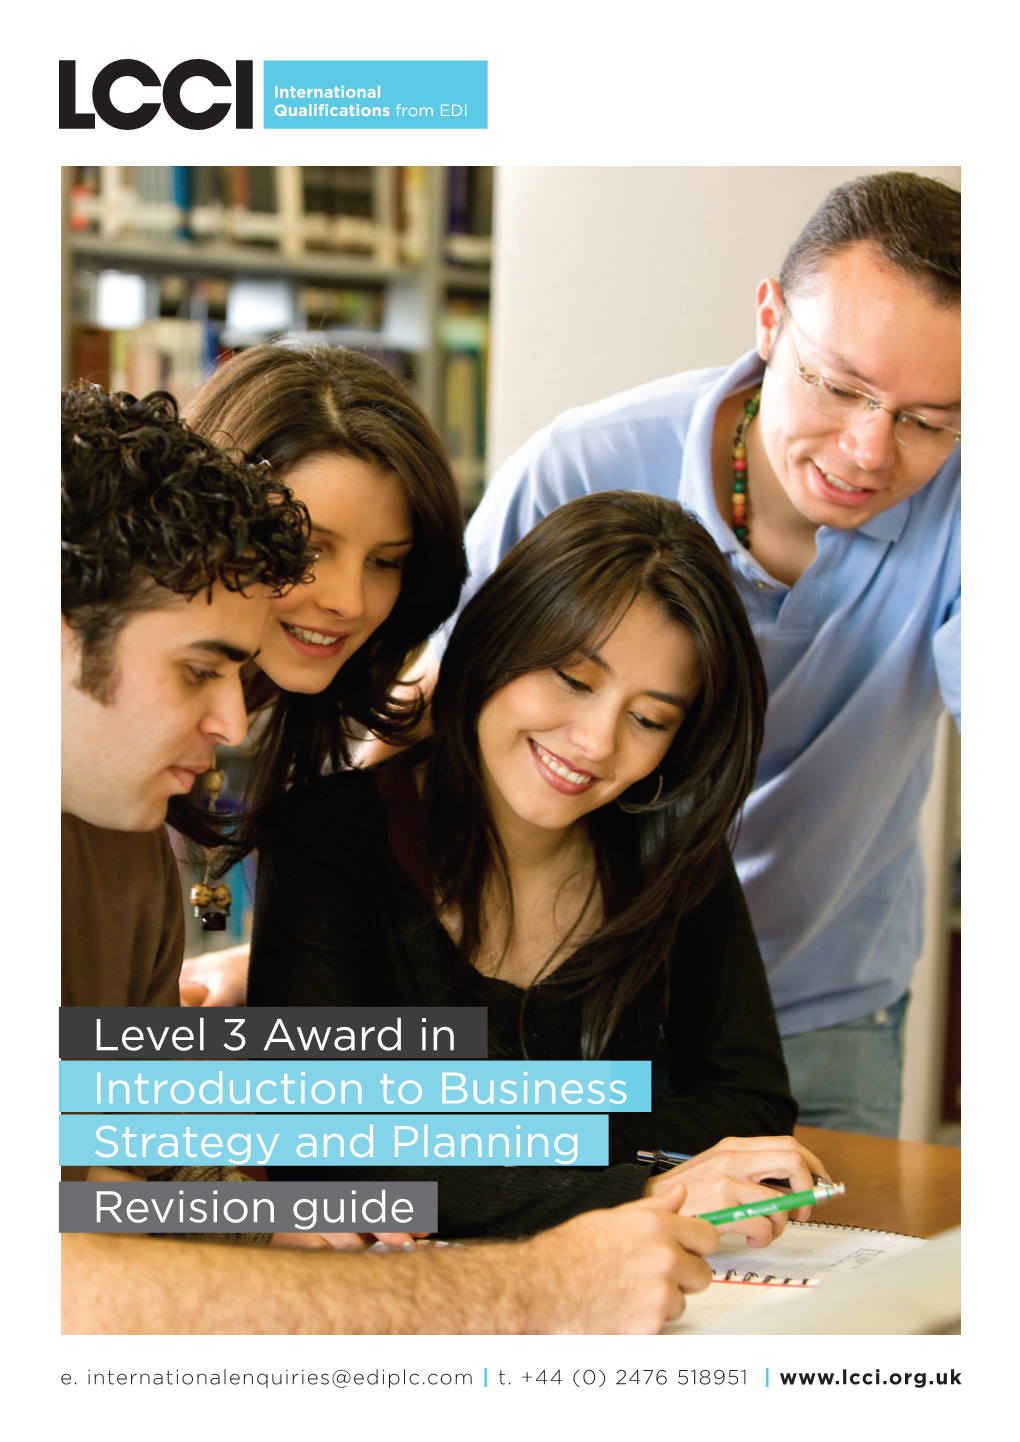 Level 3 Award in Introduction to Business Strategy and Planning Revision Guide